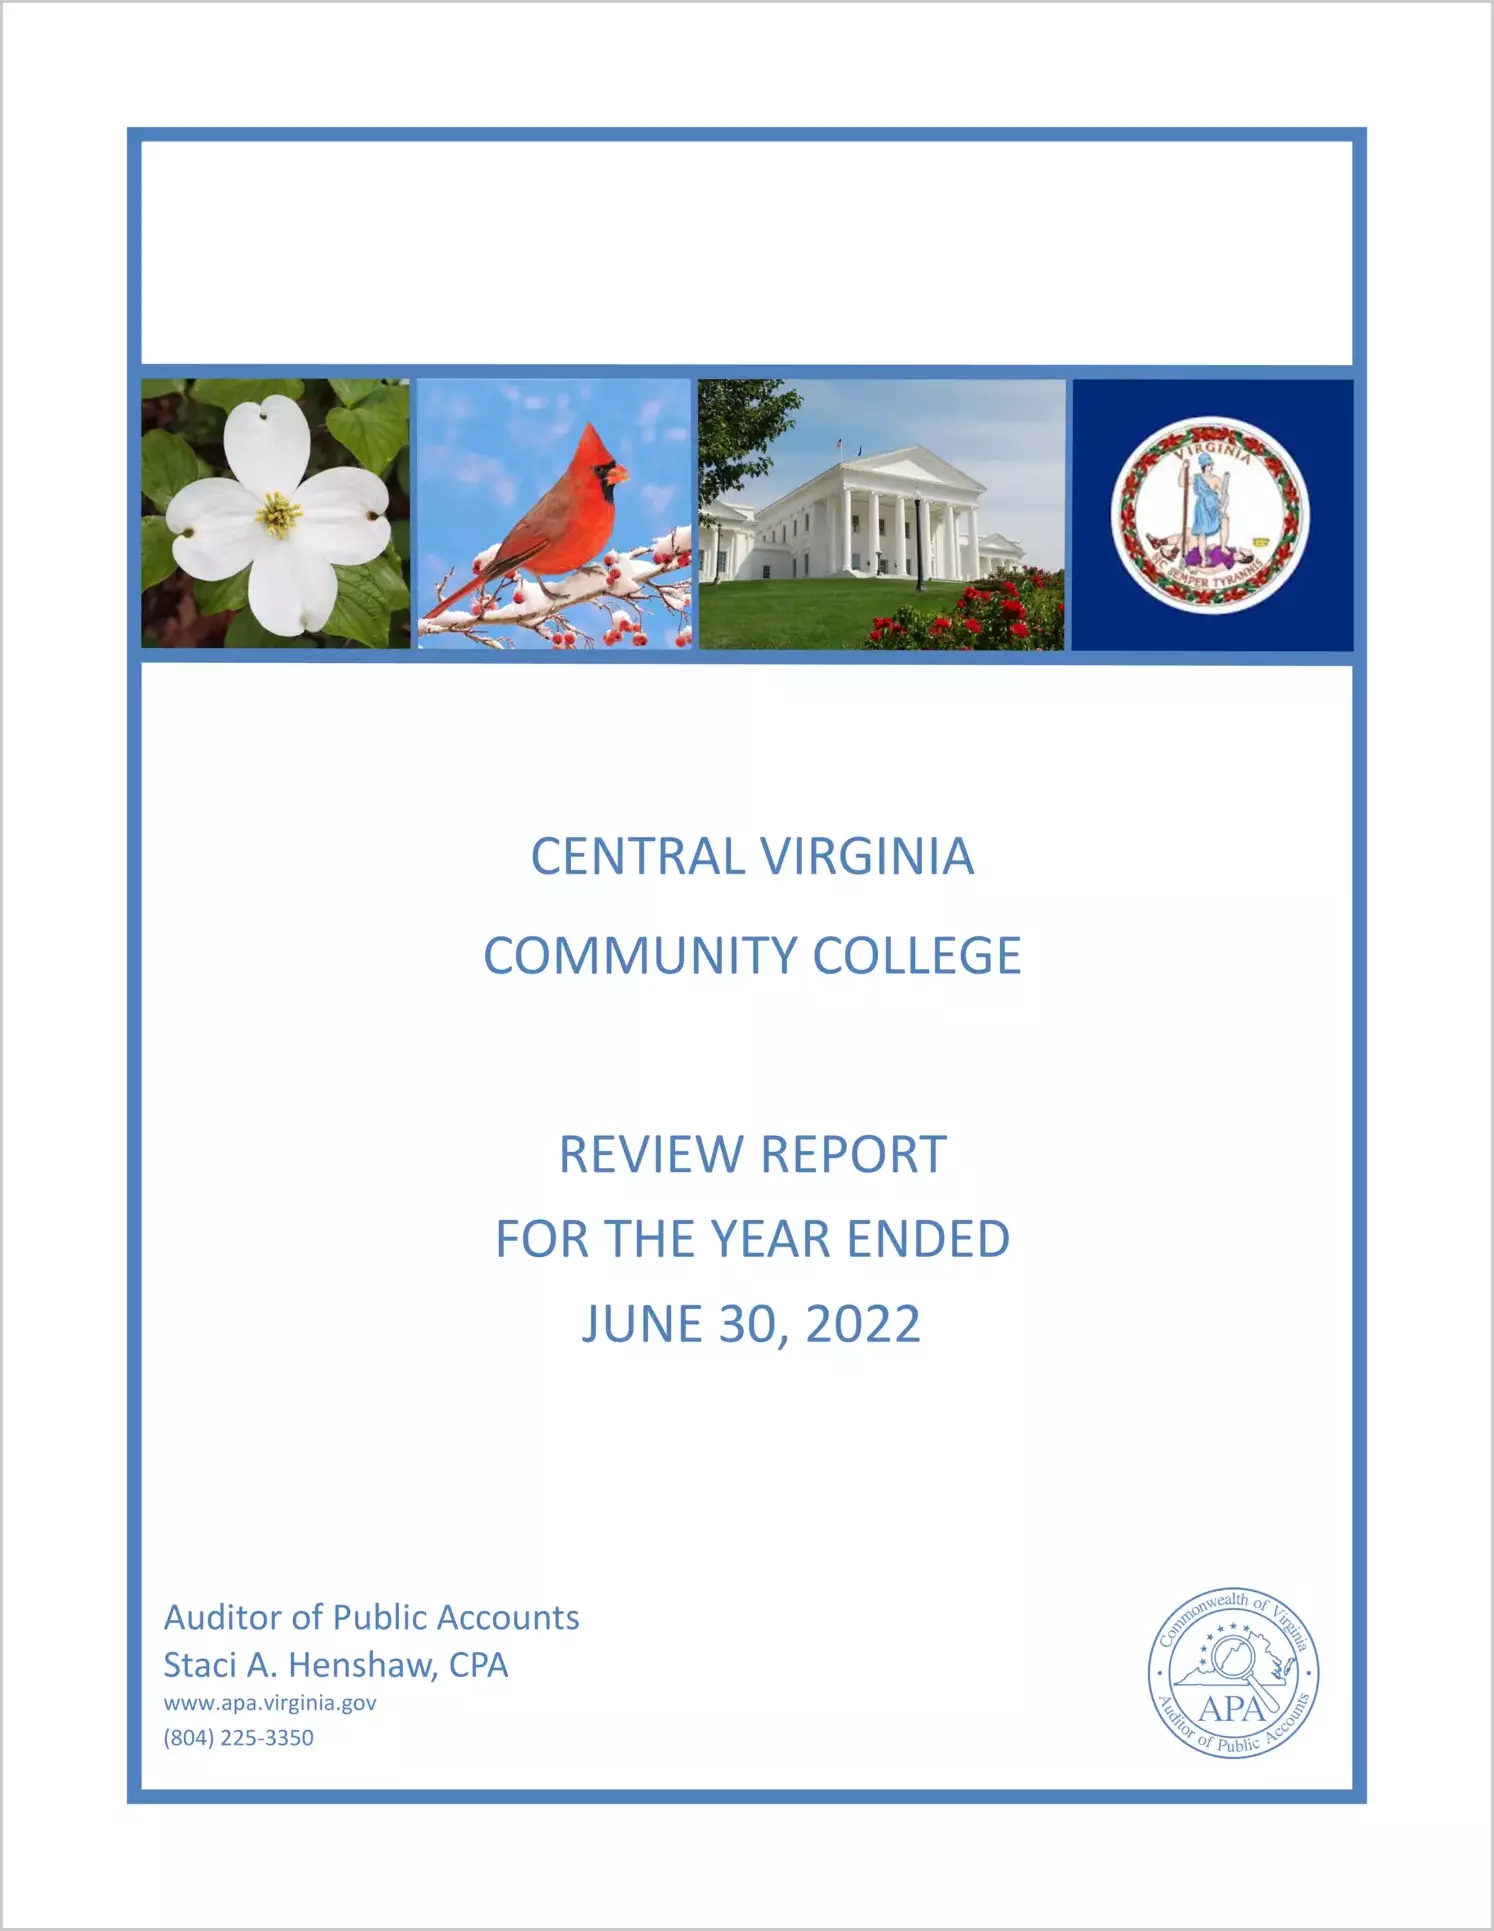 Central Virginia Community College Reaccreditation Review for the year ended June 30, 2022